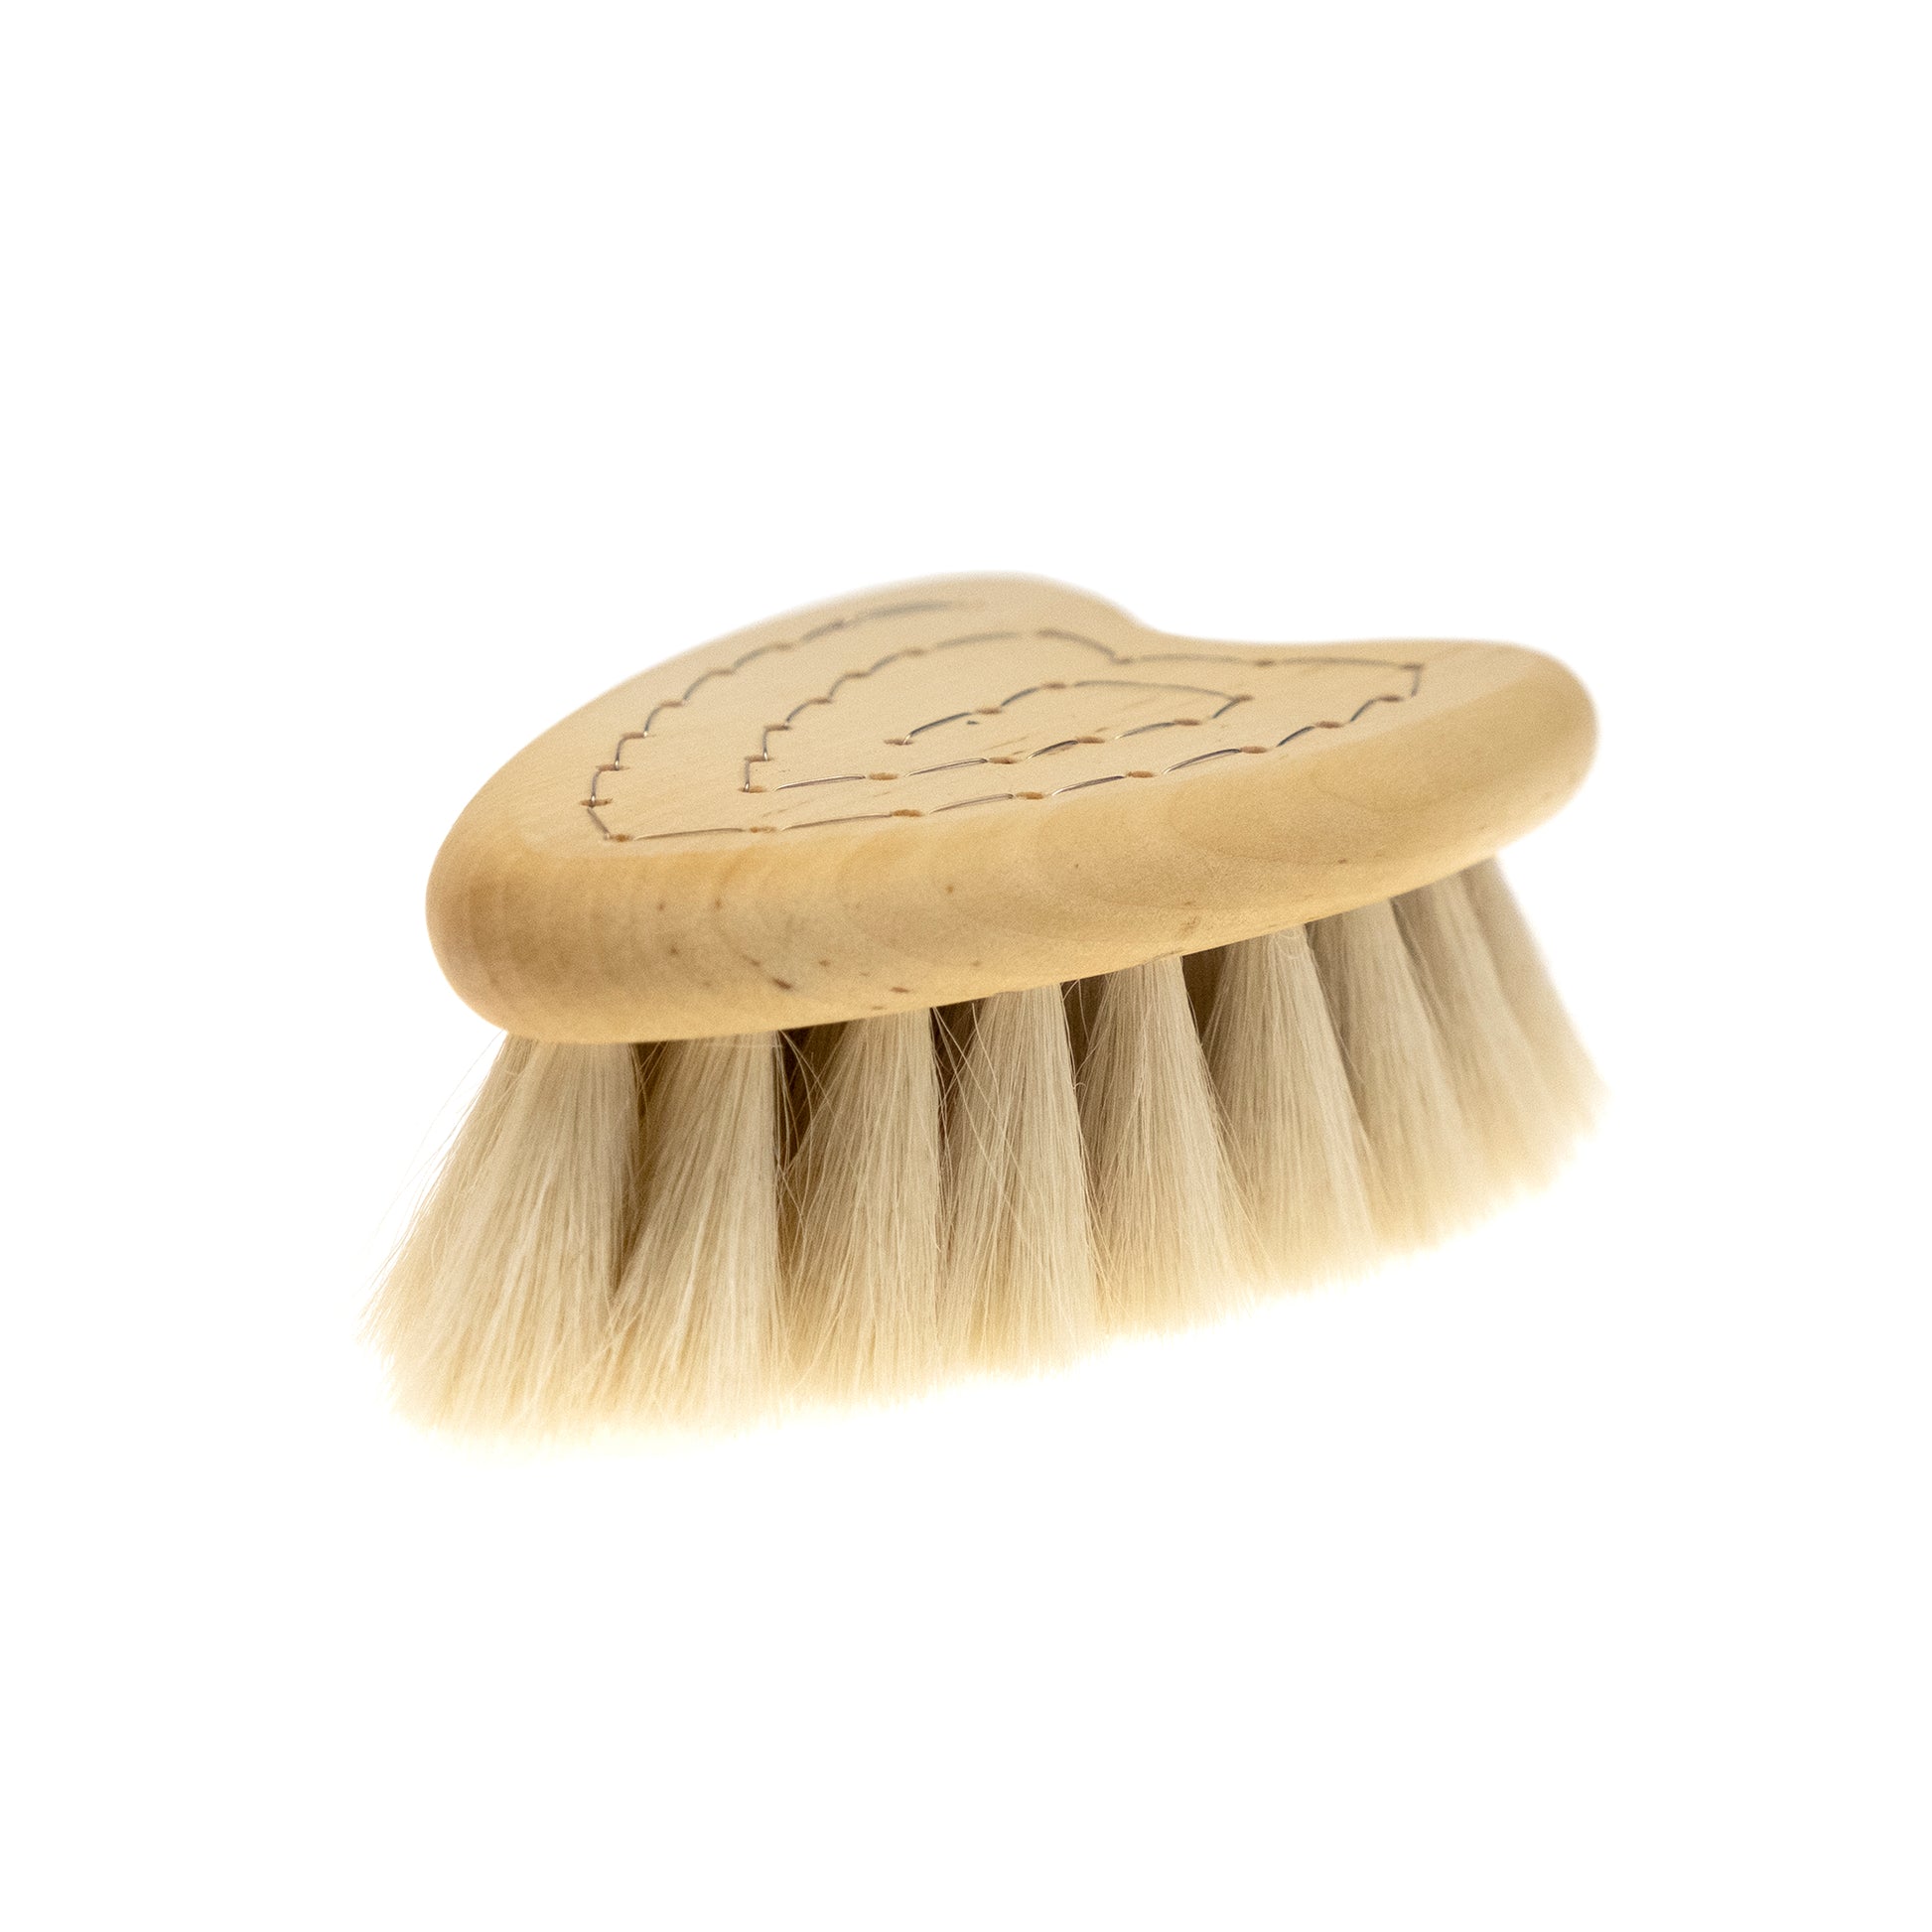 Super-soft goat’s hair baby brush with wooden base in the shape of a heart